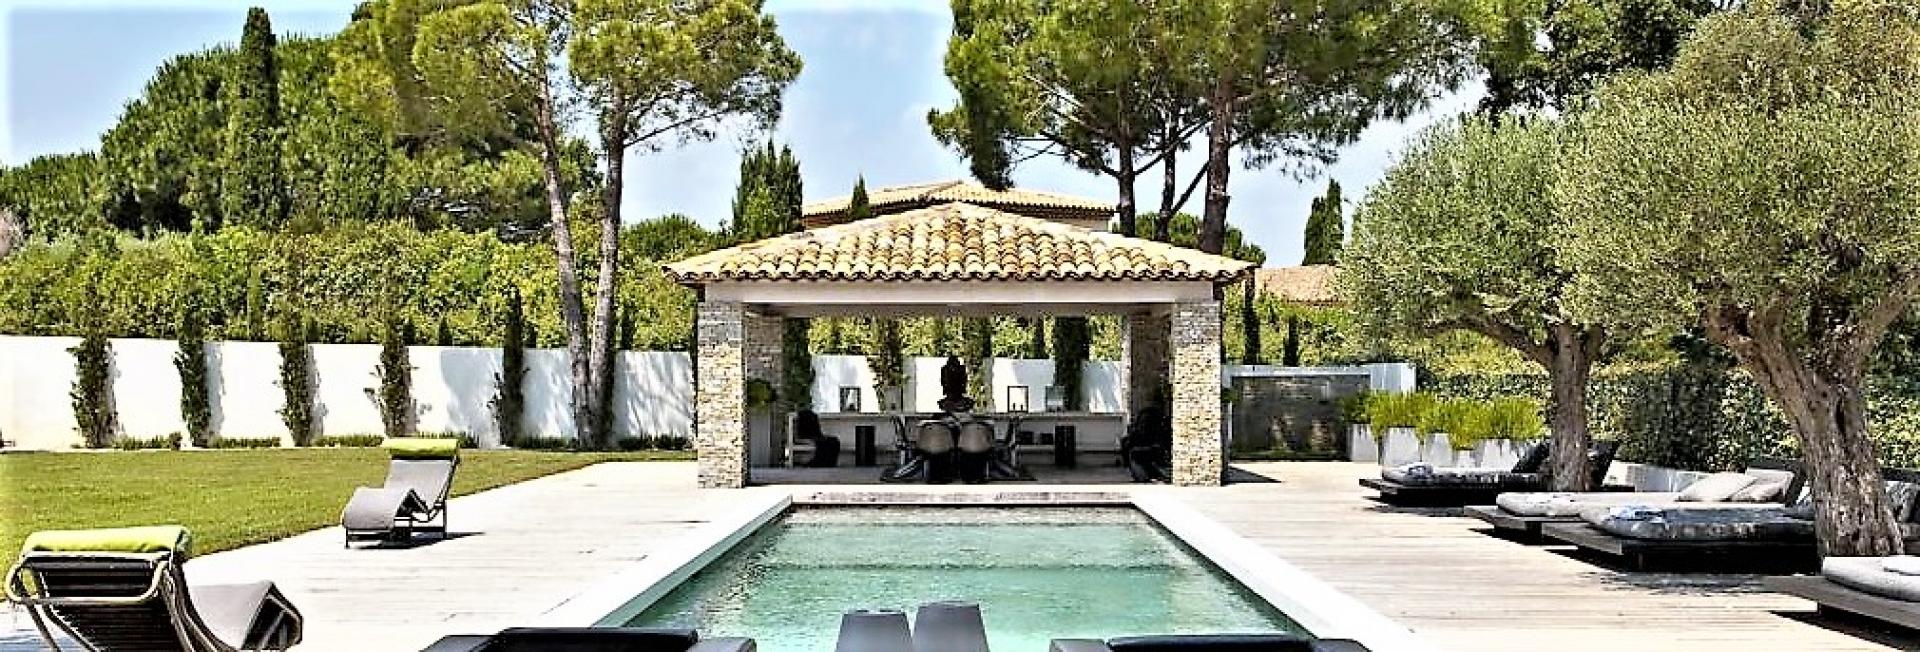 THE BEAUTIFULL SWIMMING POOL IN A VILLA  TO RENT IN ST TROPEZ IN THE COTE D'AZUR